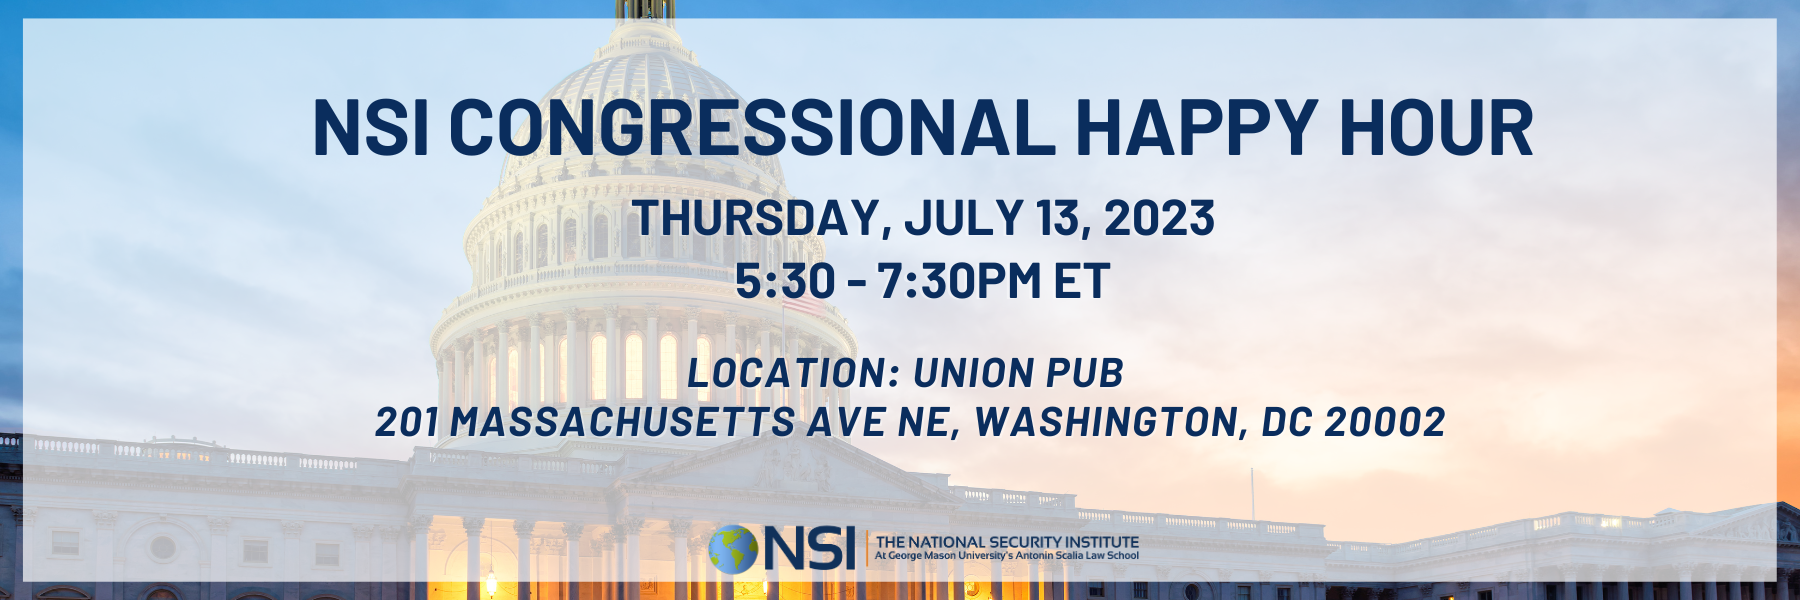 NSI Congressional Happy Hour - July 13, 2023